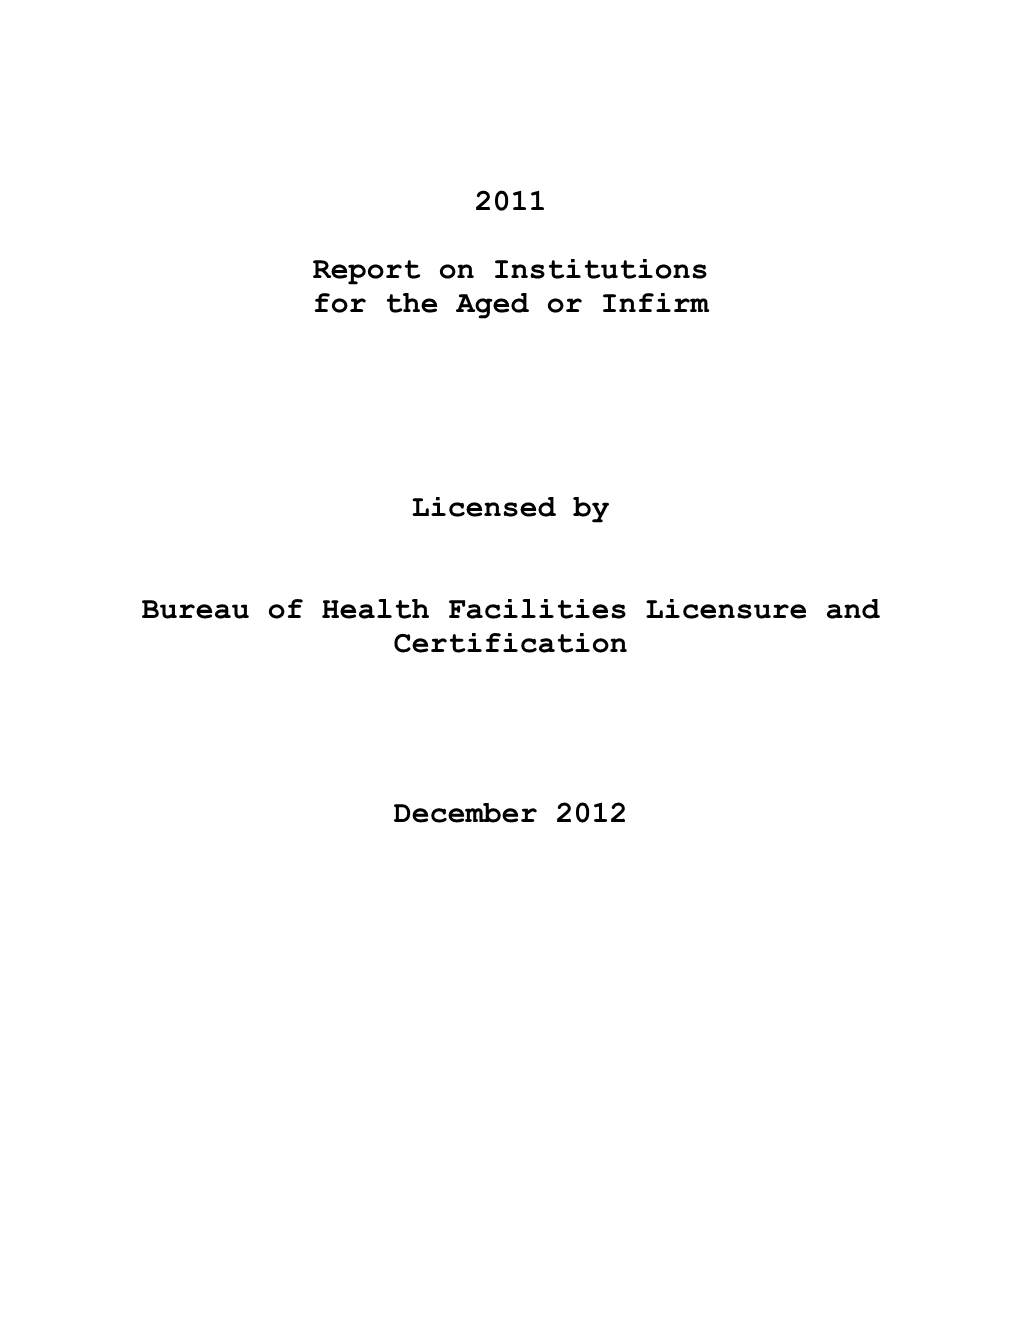 2011 Report on Institutions for the Aged Or Infirm Licensed by Bureau